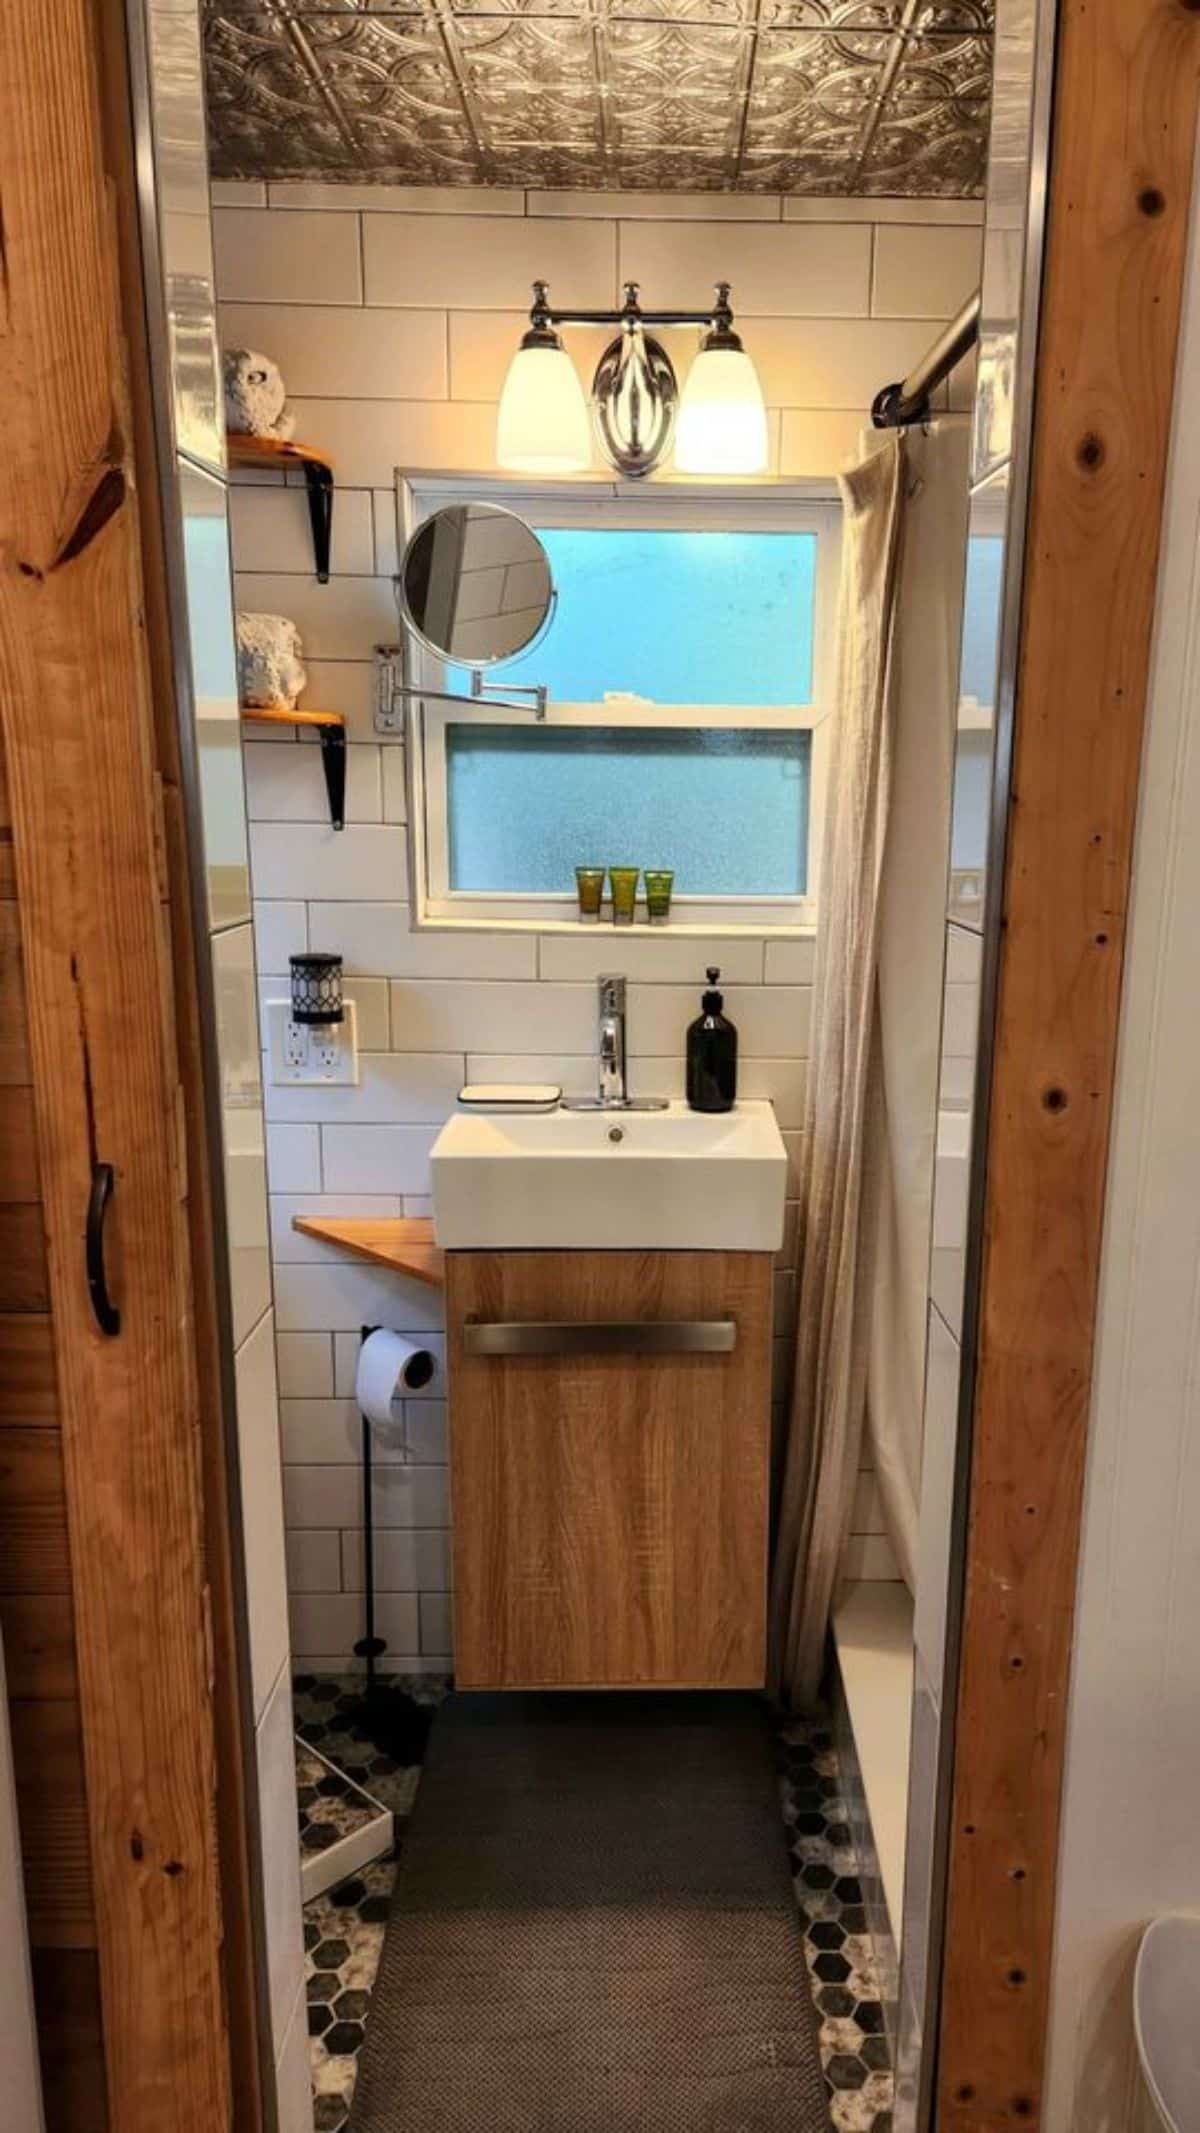 sink with vanity and small mirror in bathroom of rustic mini home